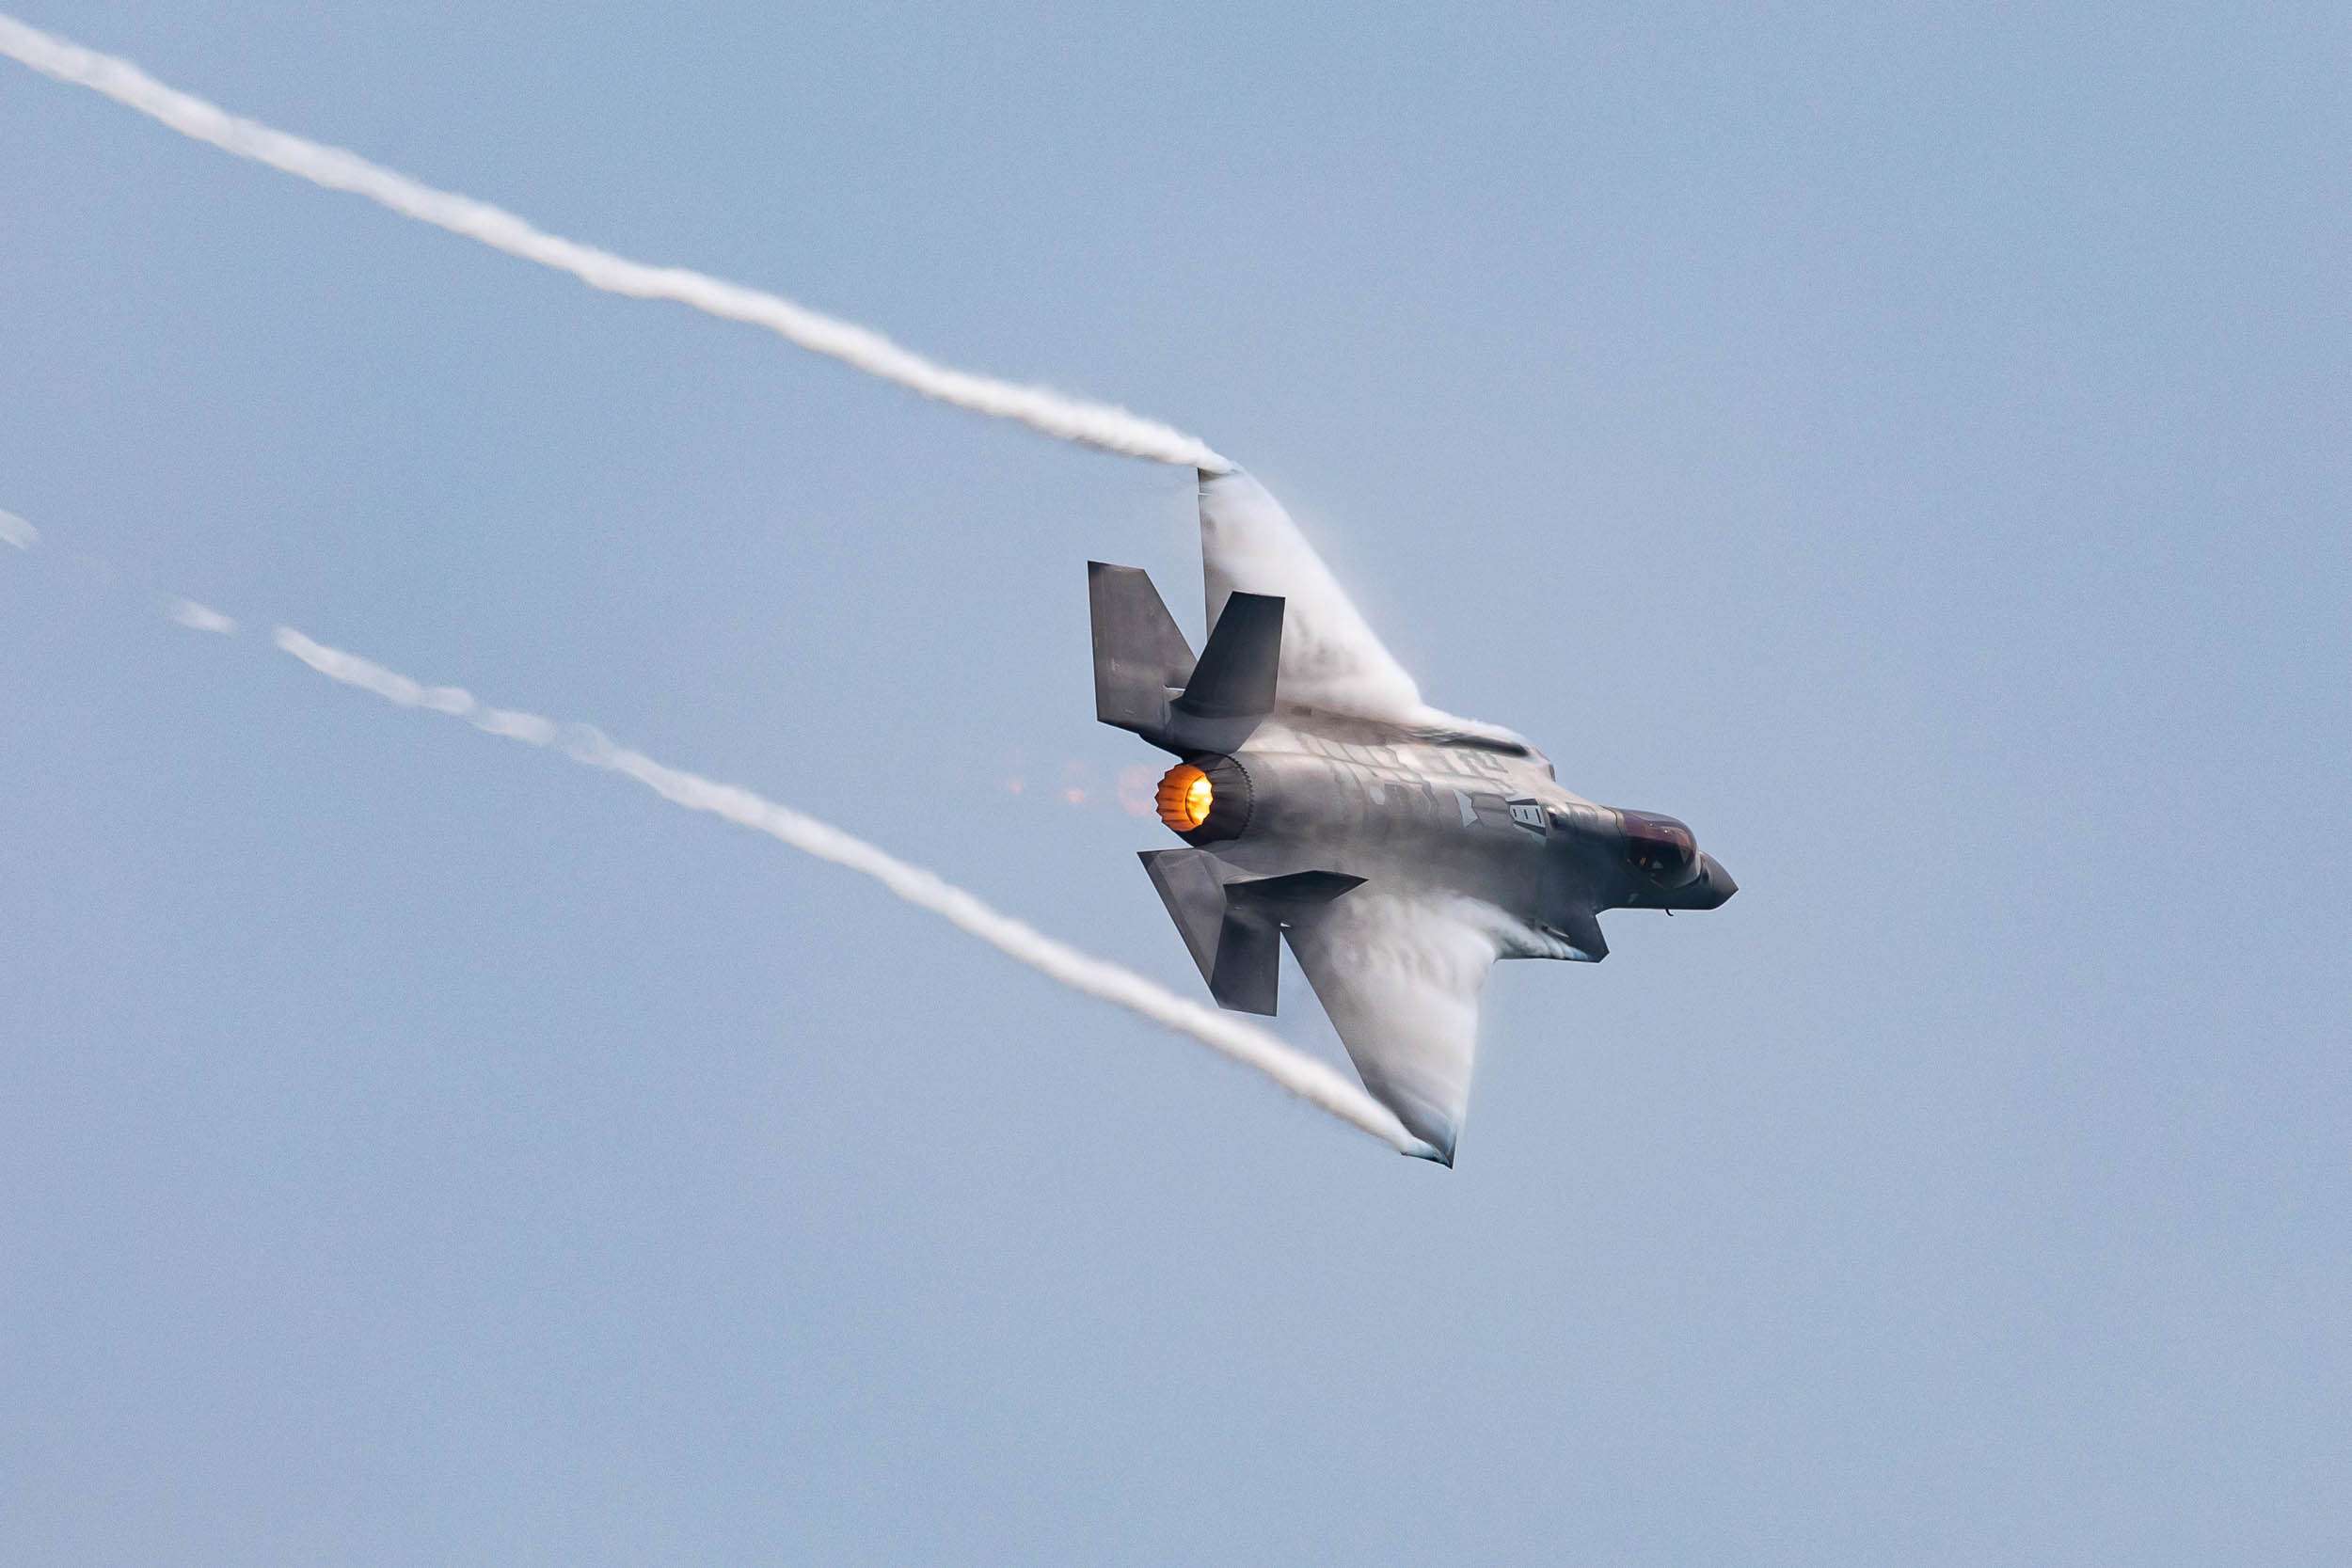 A US Air Force F-35 flies at high speed with visible vapor and afterburner